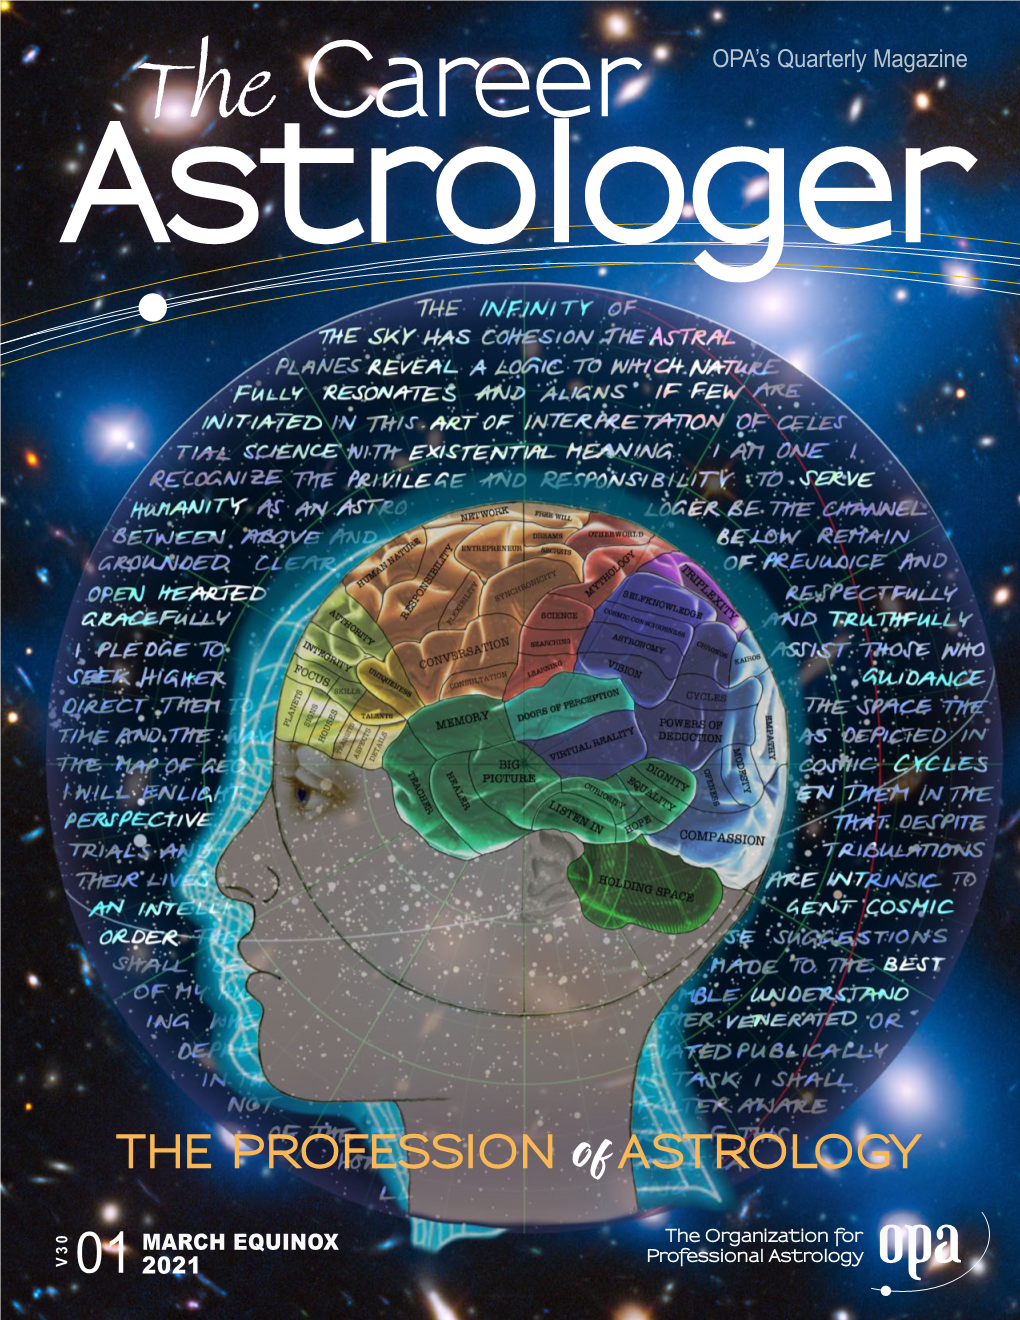 The Career Astrologer Features ASTROLOGY in the 21ST MARCH EQUINOX V30 01 2021 CENTURY the PROFESSION of ASTROLOGY